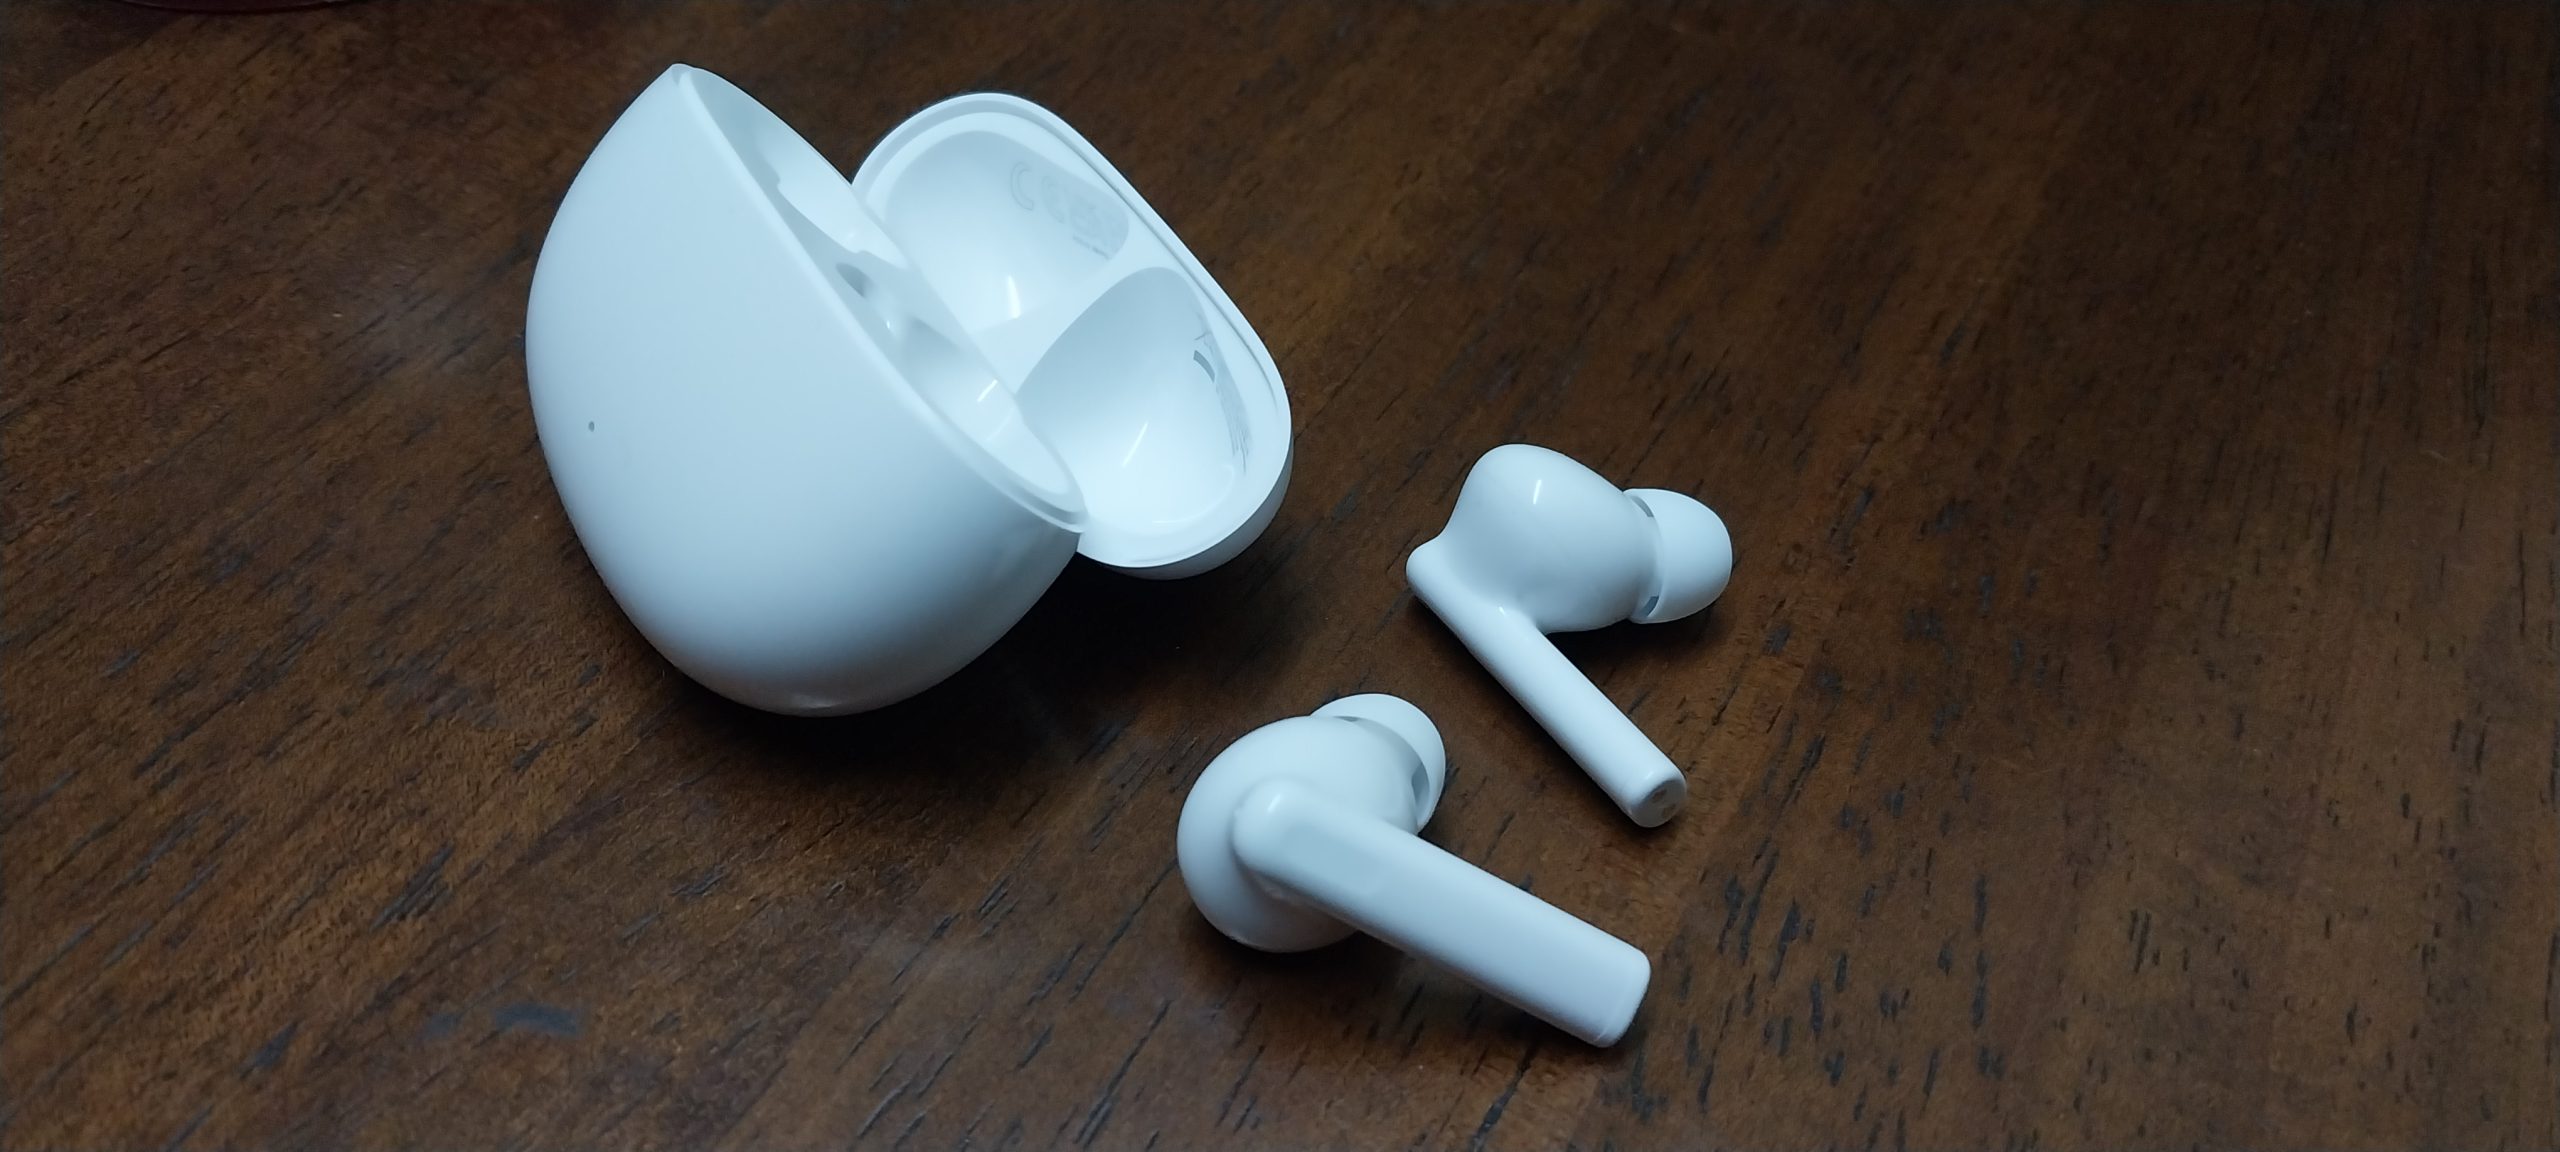 Honor Choice Earbuds X5 - Key Features